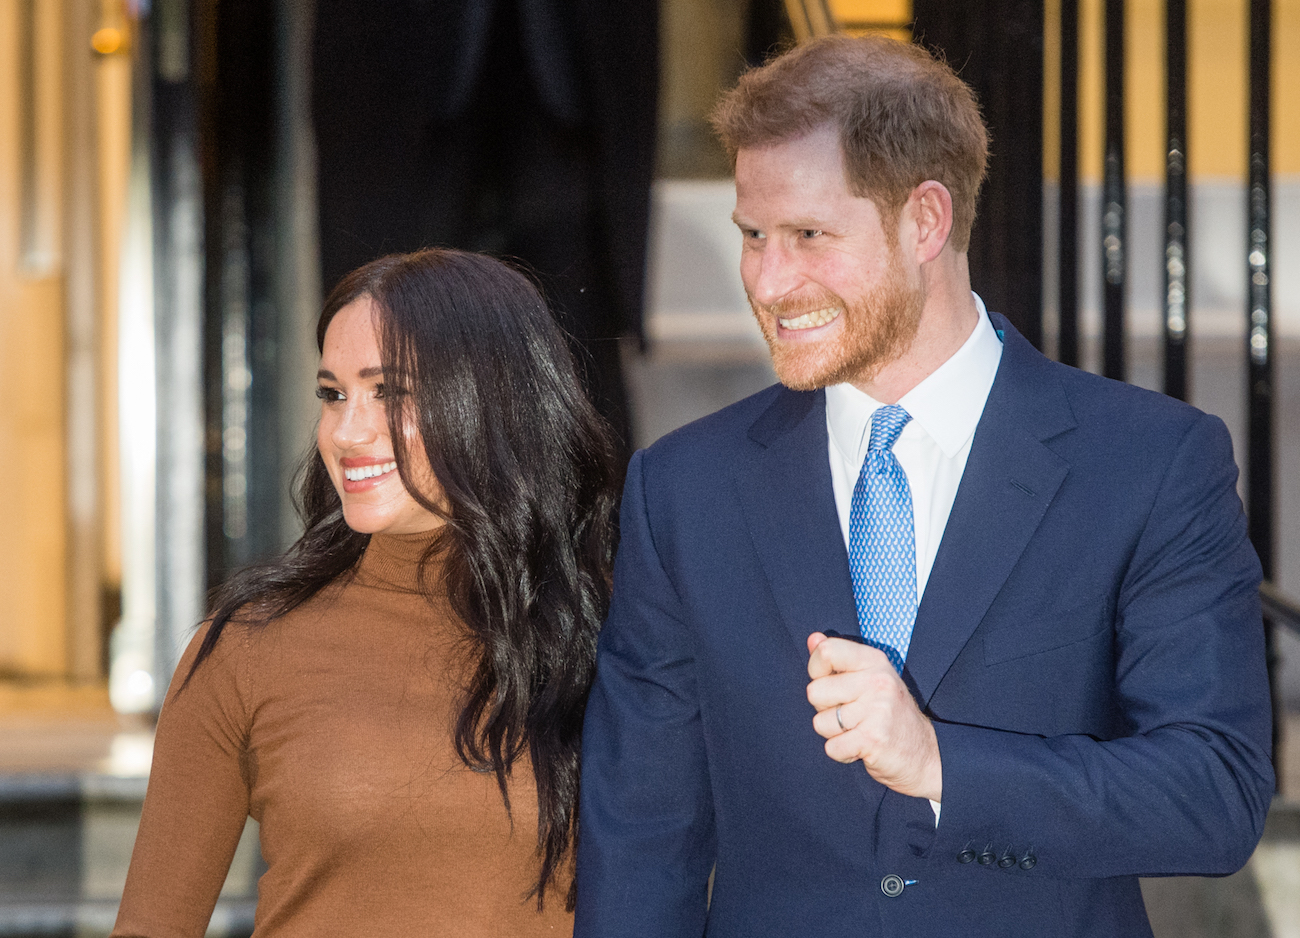 Meghan Markle and Prince Harry smiling, looking to the side